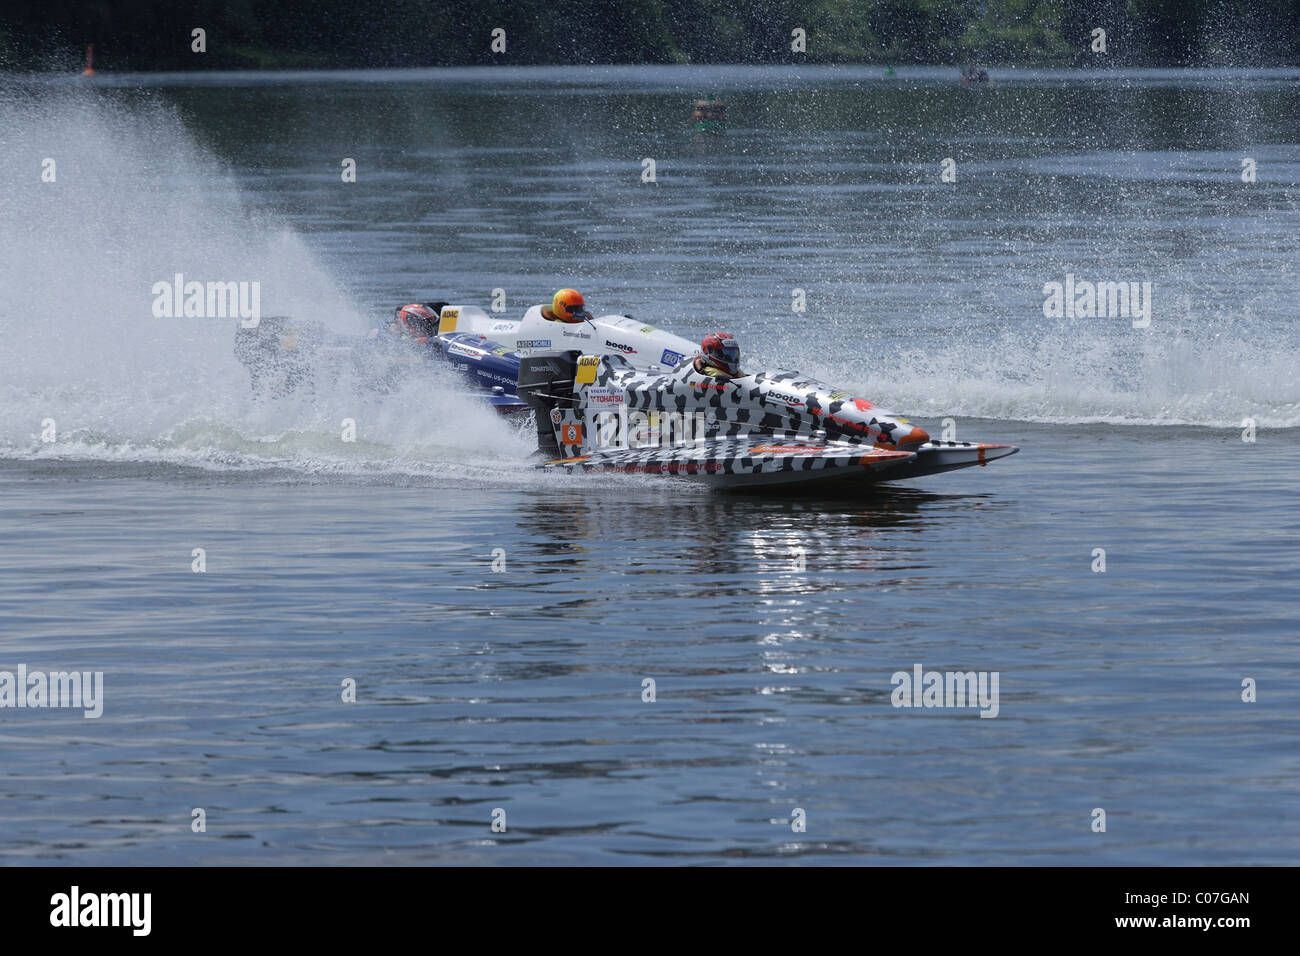 Motor boat, international motor boat race on the Moselle river at Brodenbach, Rhineland-Palatinate, Germany, Europe Stock Photo